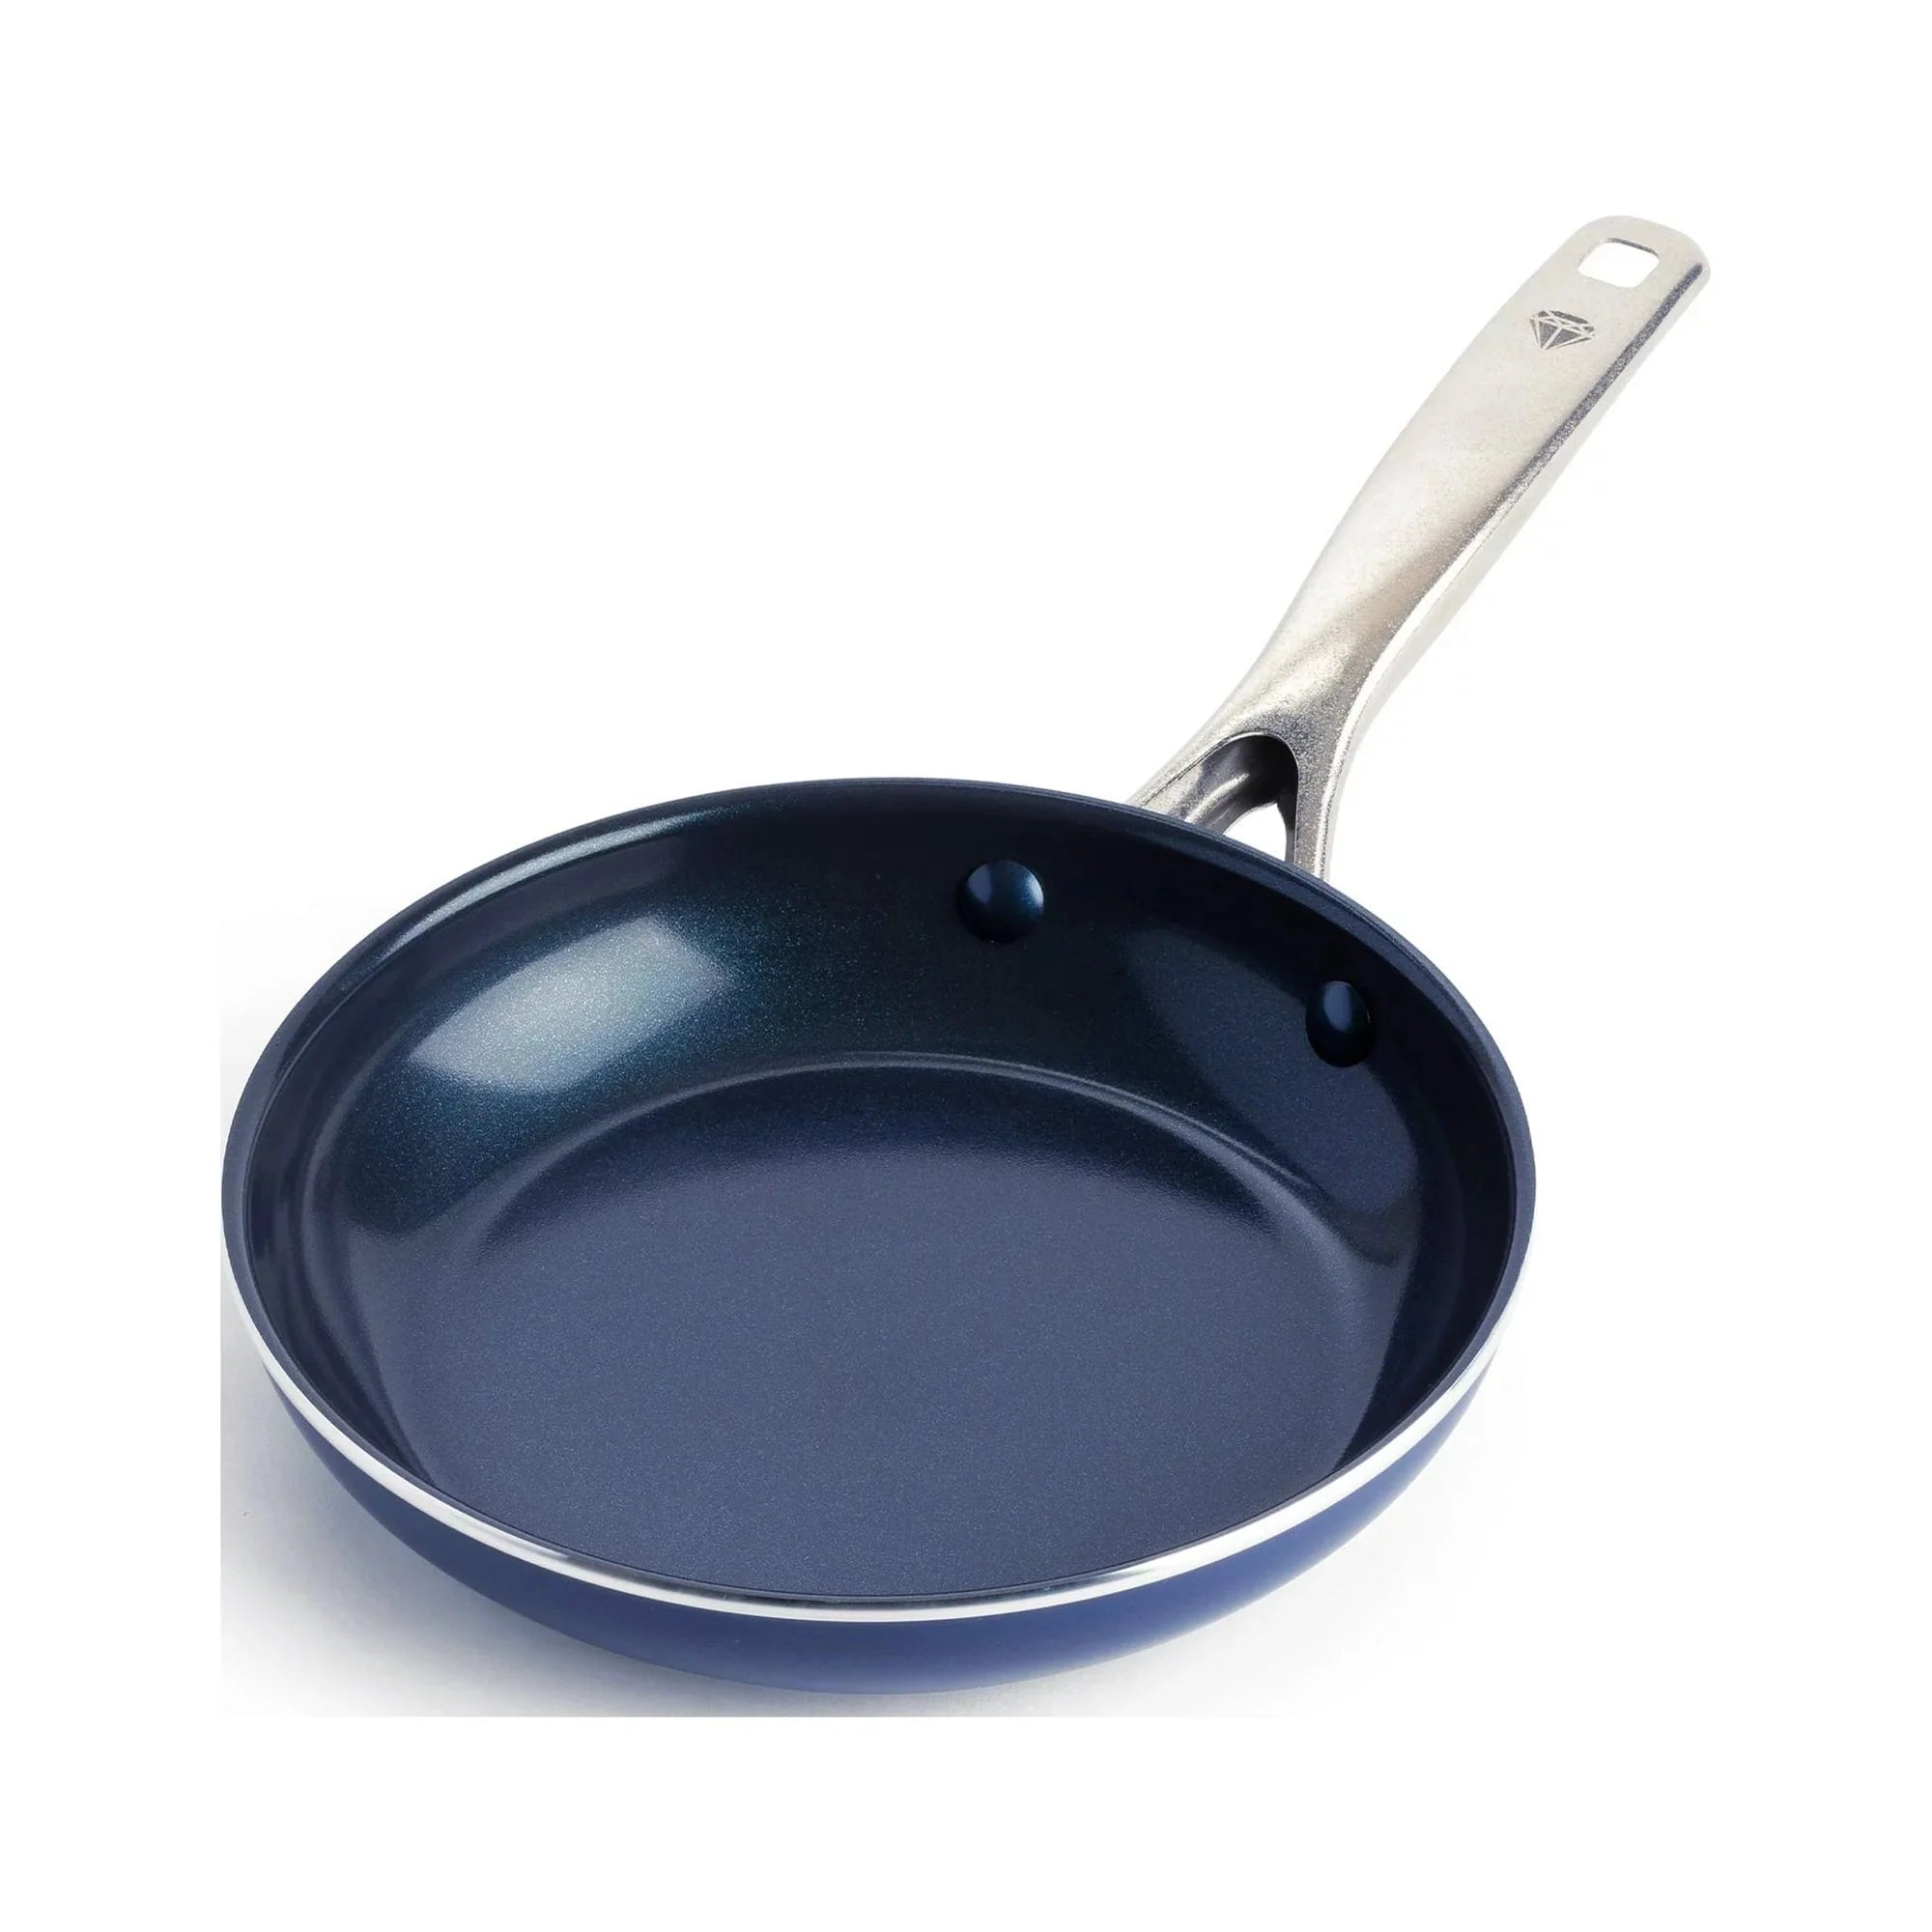 Wholesale prices with free shipping all over United States Blue Diamond Ceramic Nonstick Fry Pan/Skillet, 8 Inch Frypan - Steven Deals